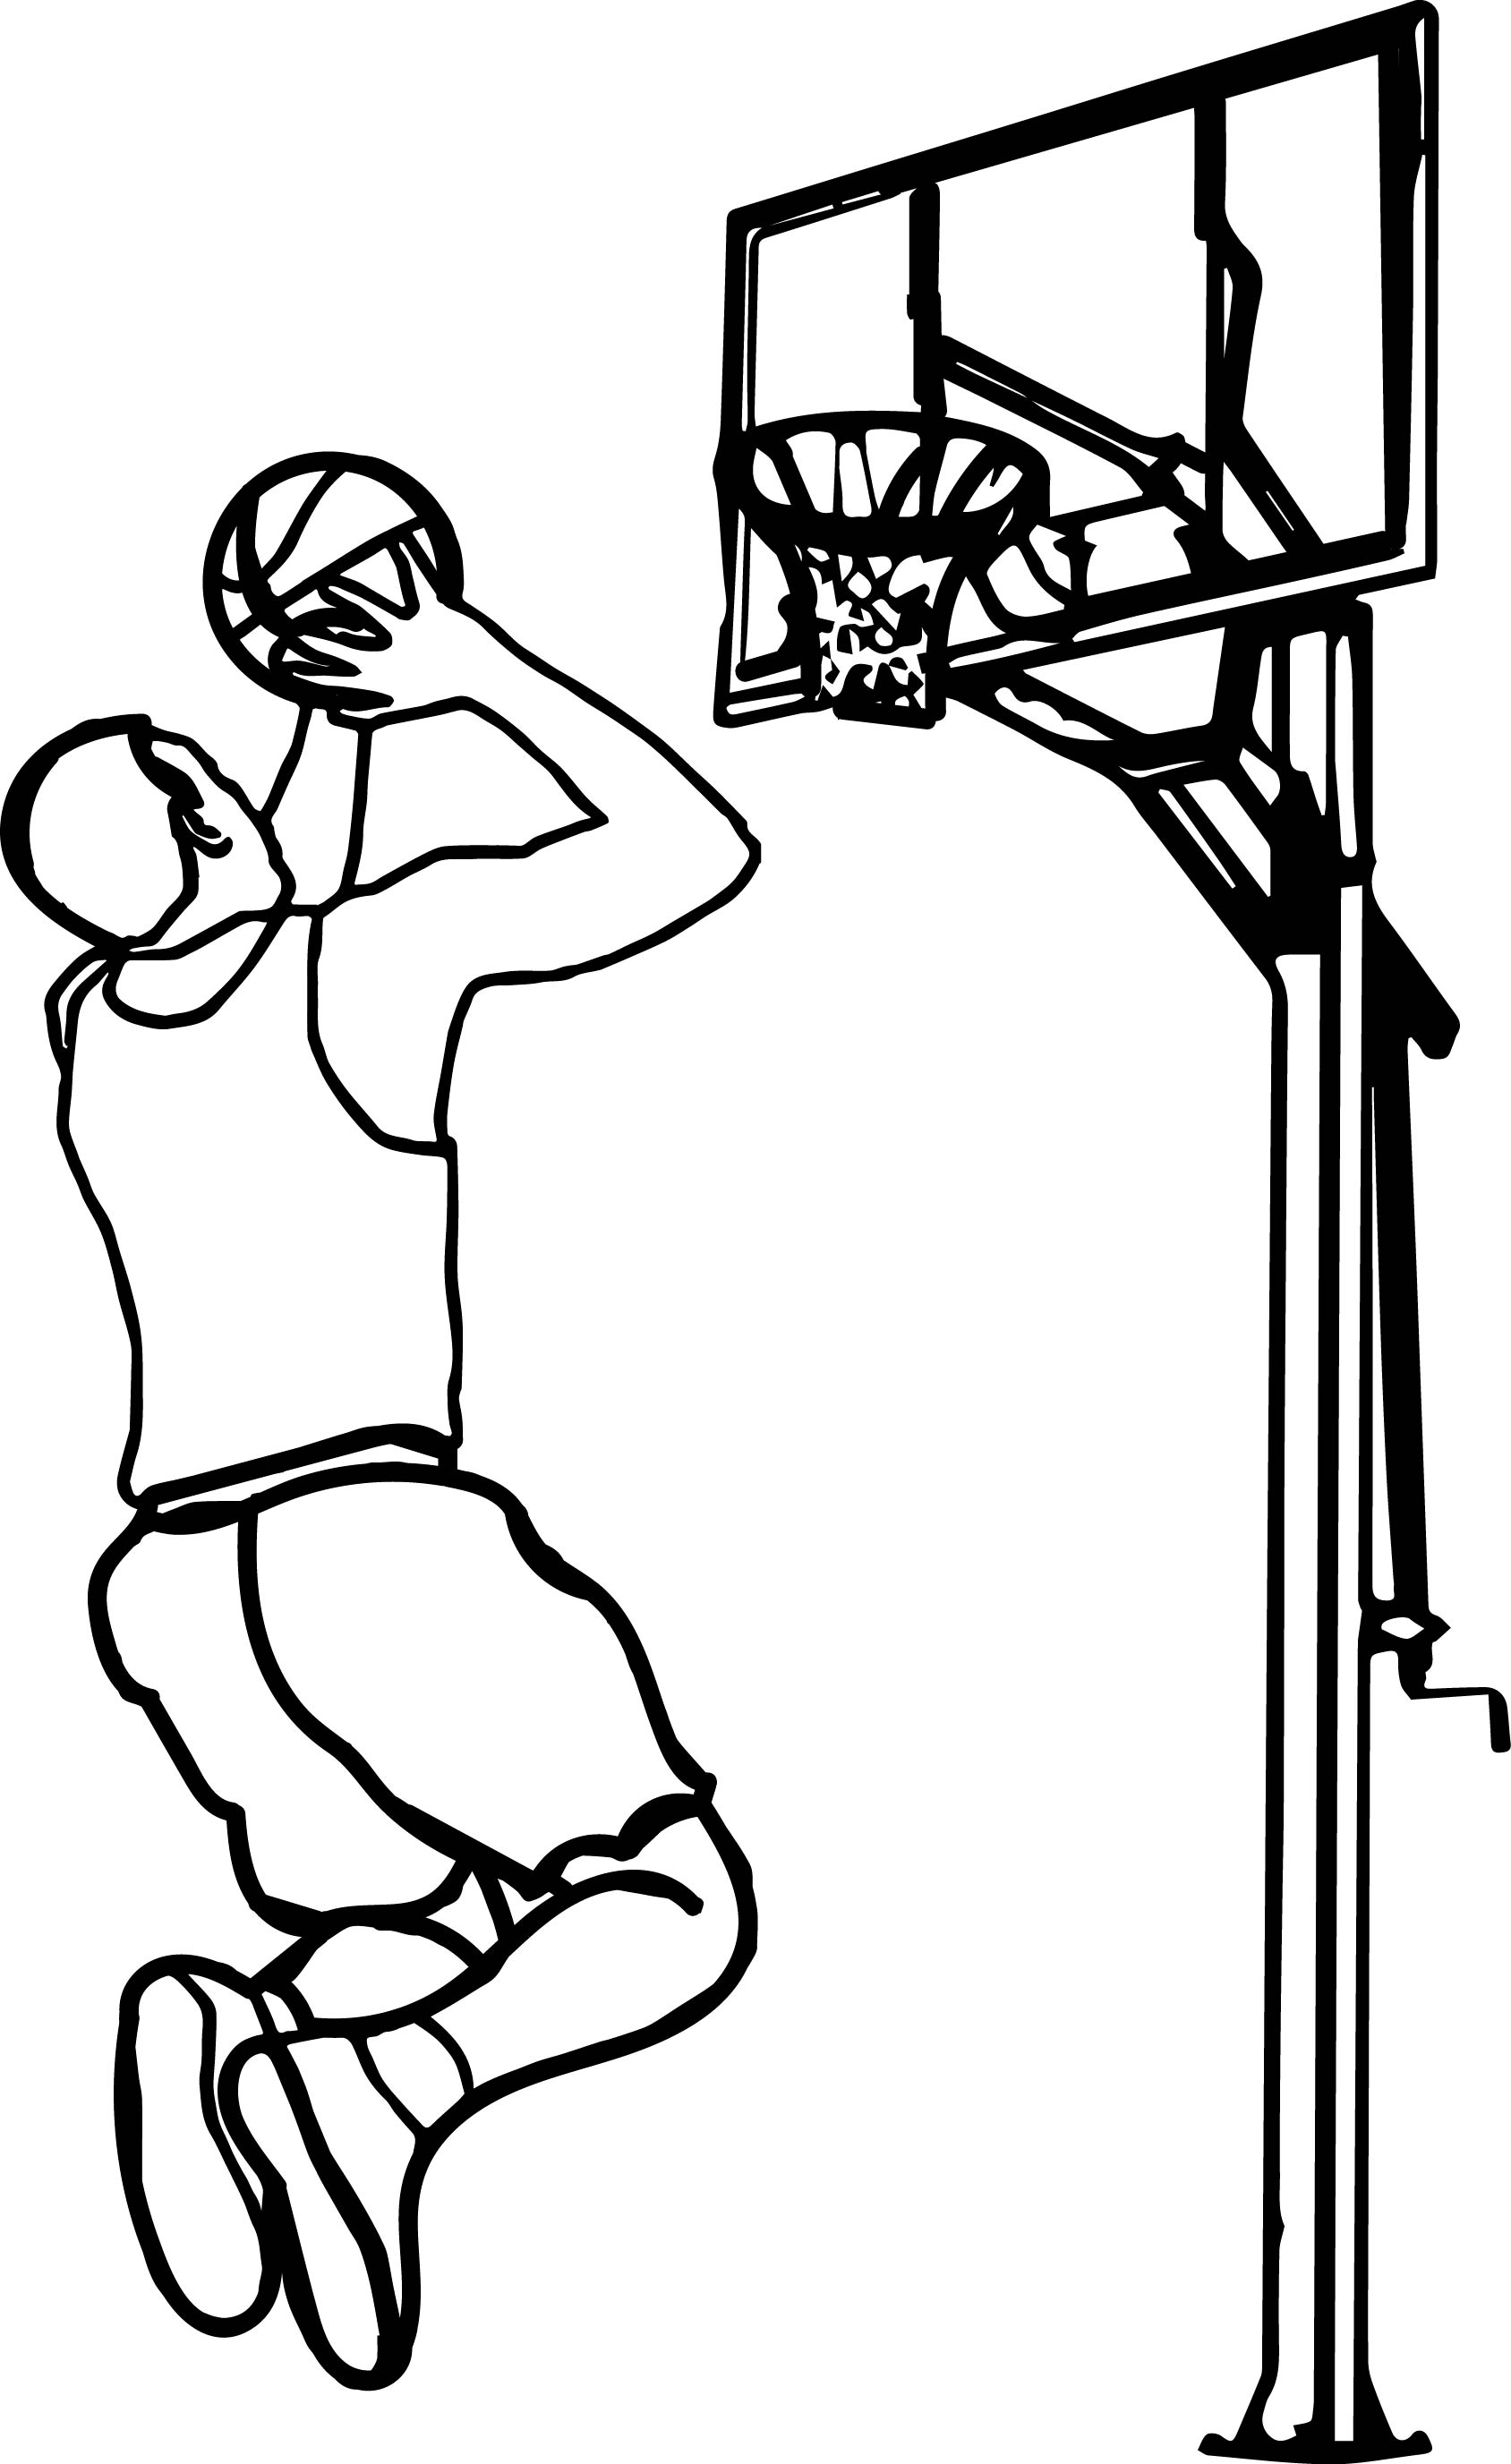 Basketball Hoop Coloring Page at GetColorings.com | Free ...